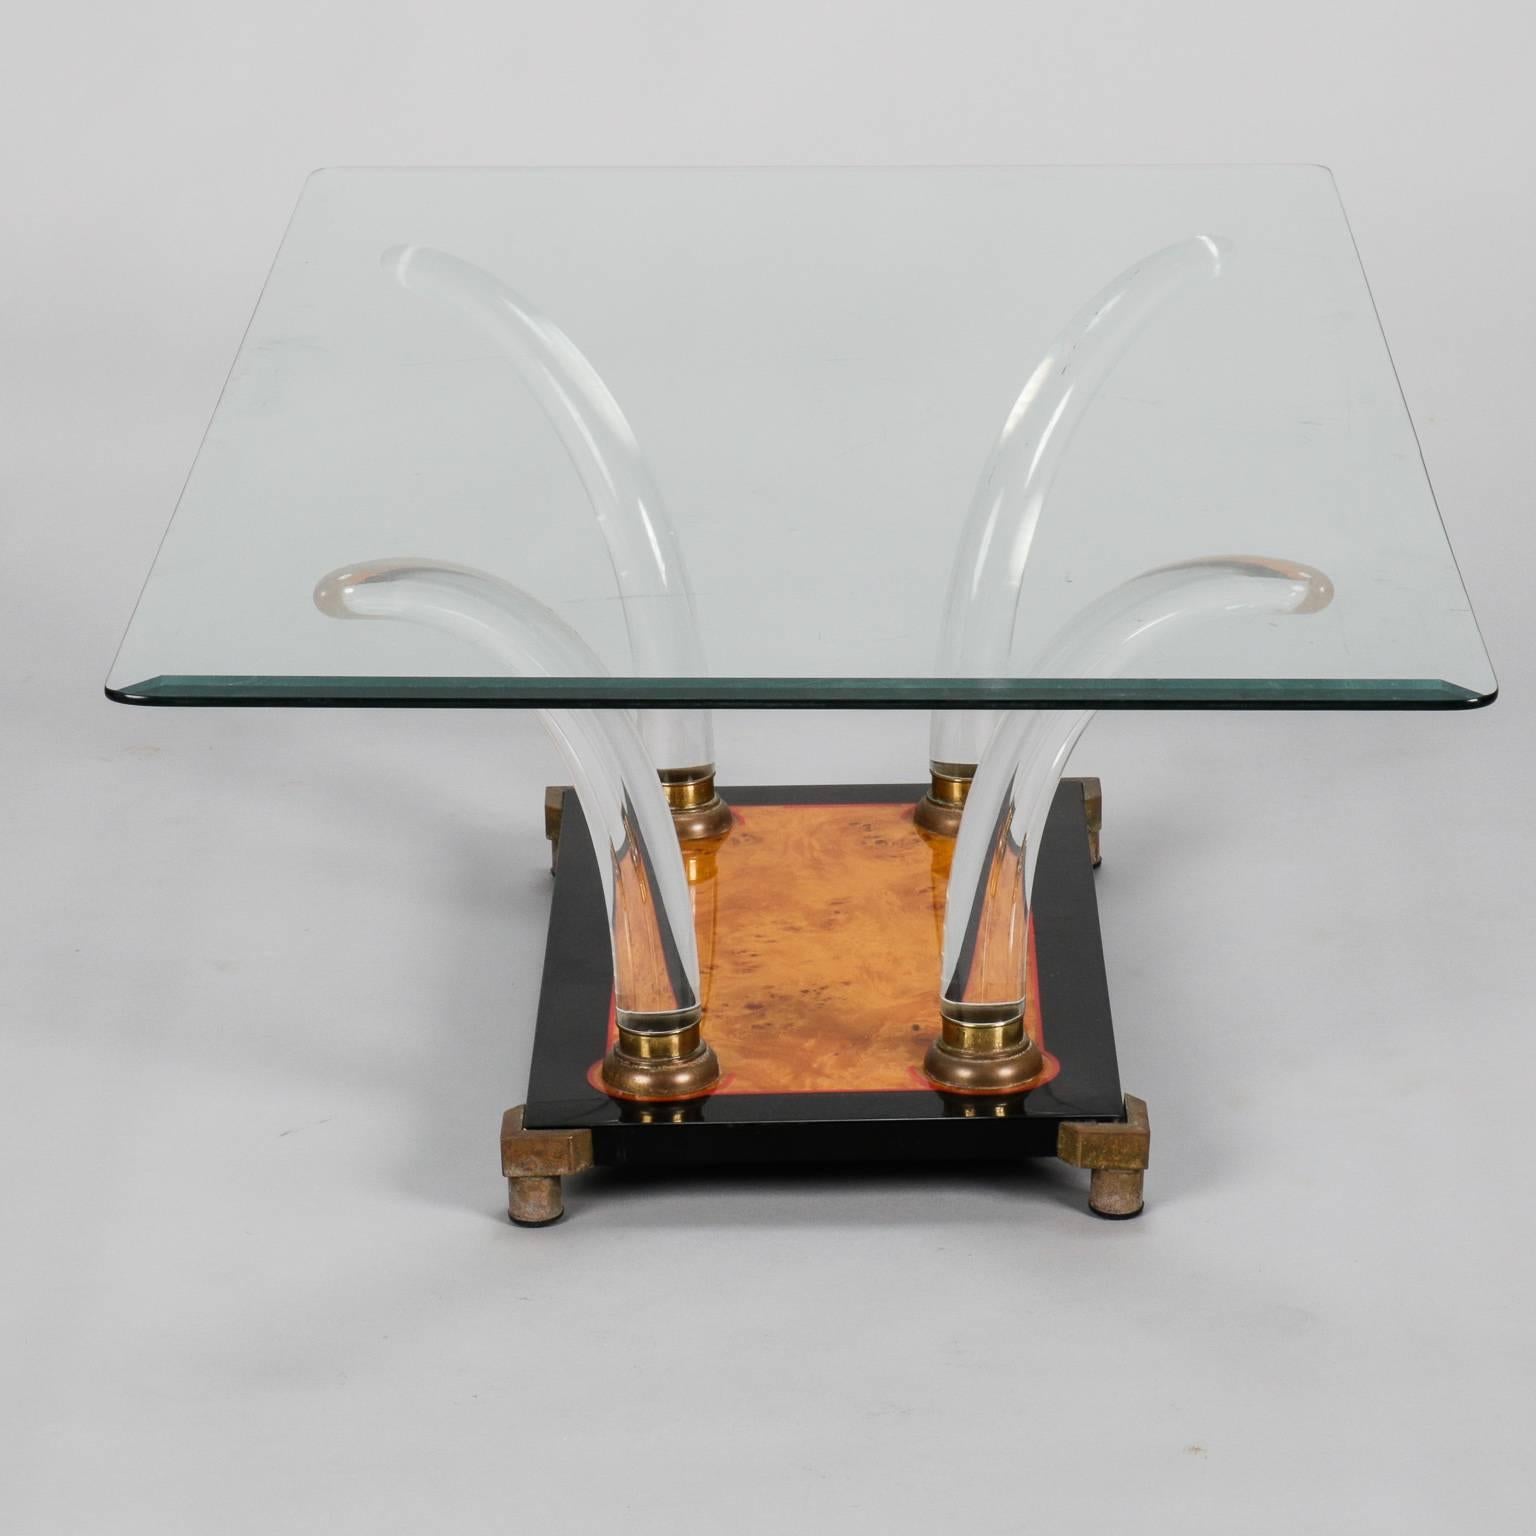 Cocktail table has a black enameled base with red accents, brass feet and burl wood center and clear Lucite tusk-shaped arms supporting a glass tabletop, circa 1970s. Found in Italy - unknown maker and origin.
  